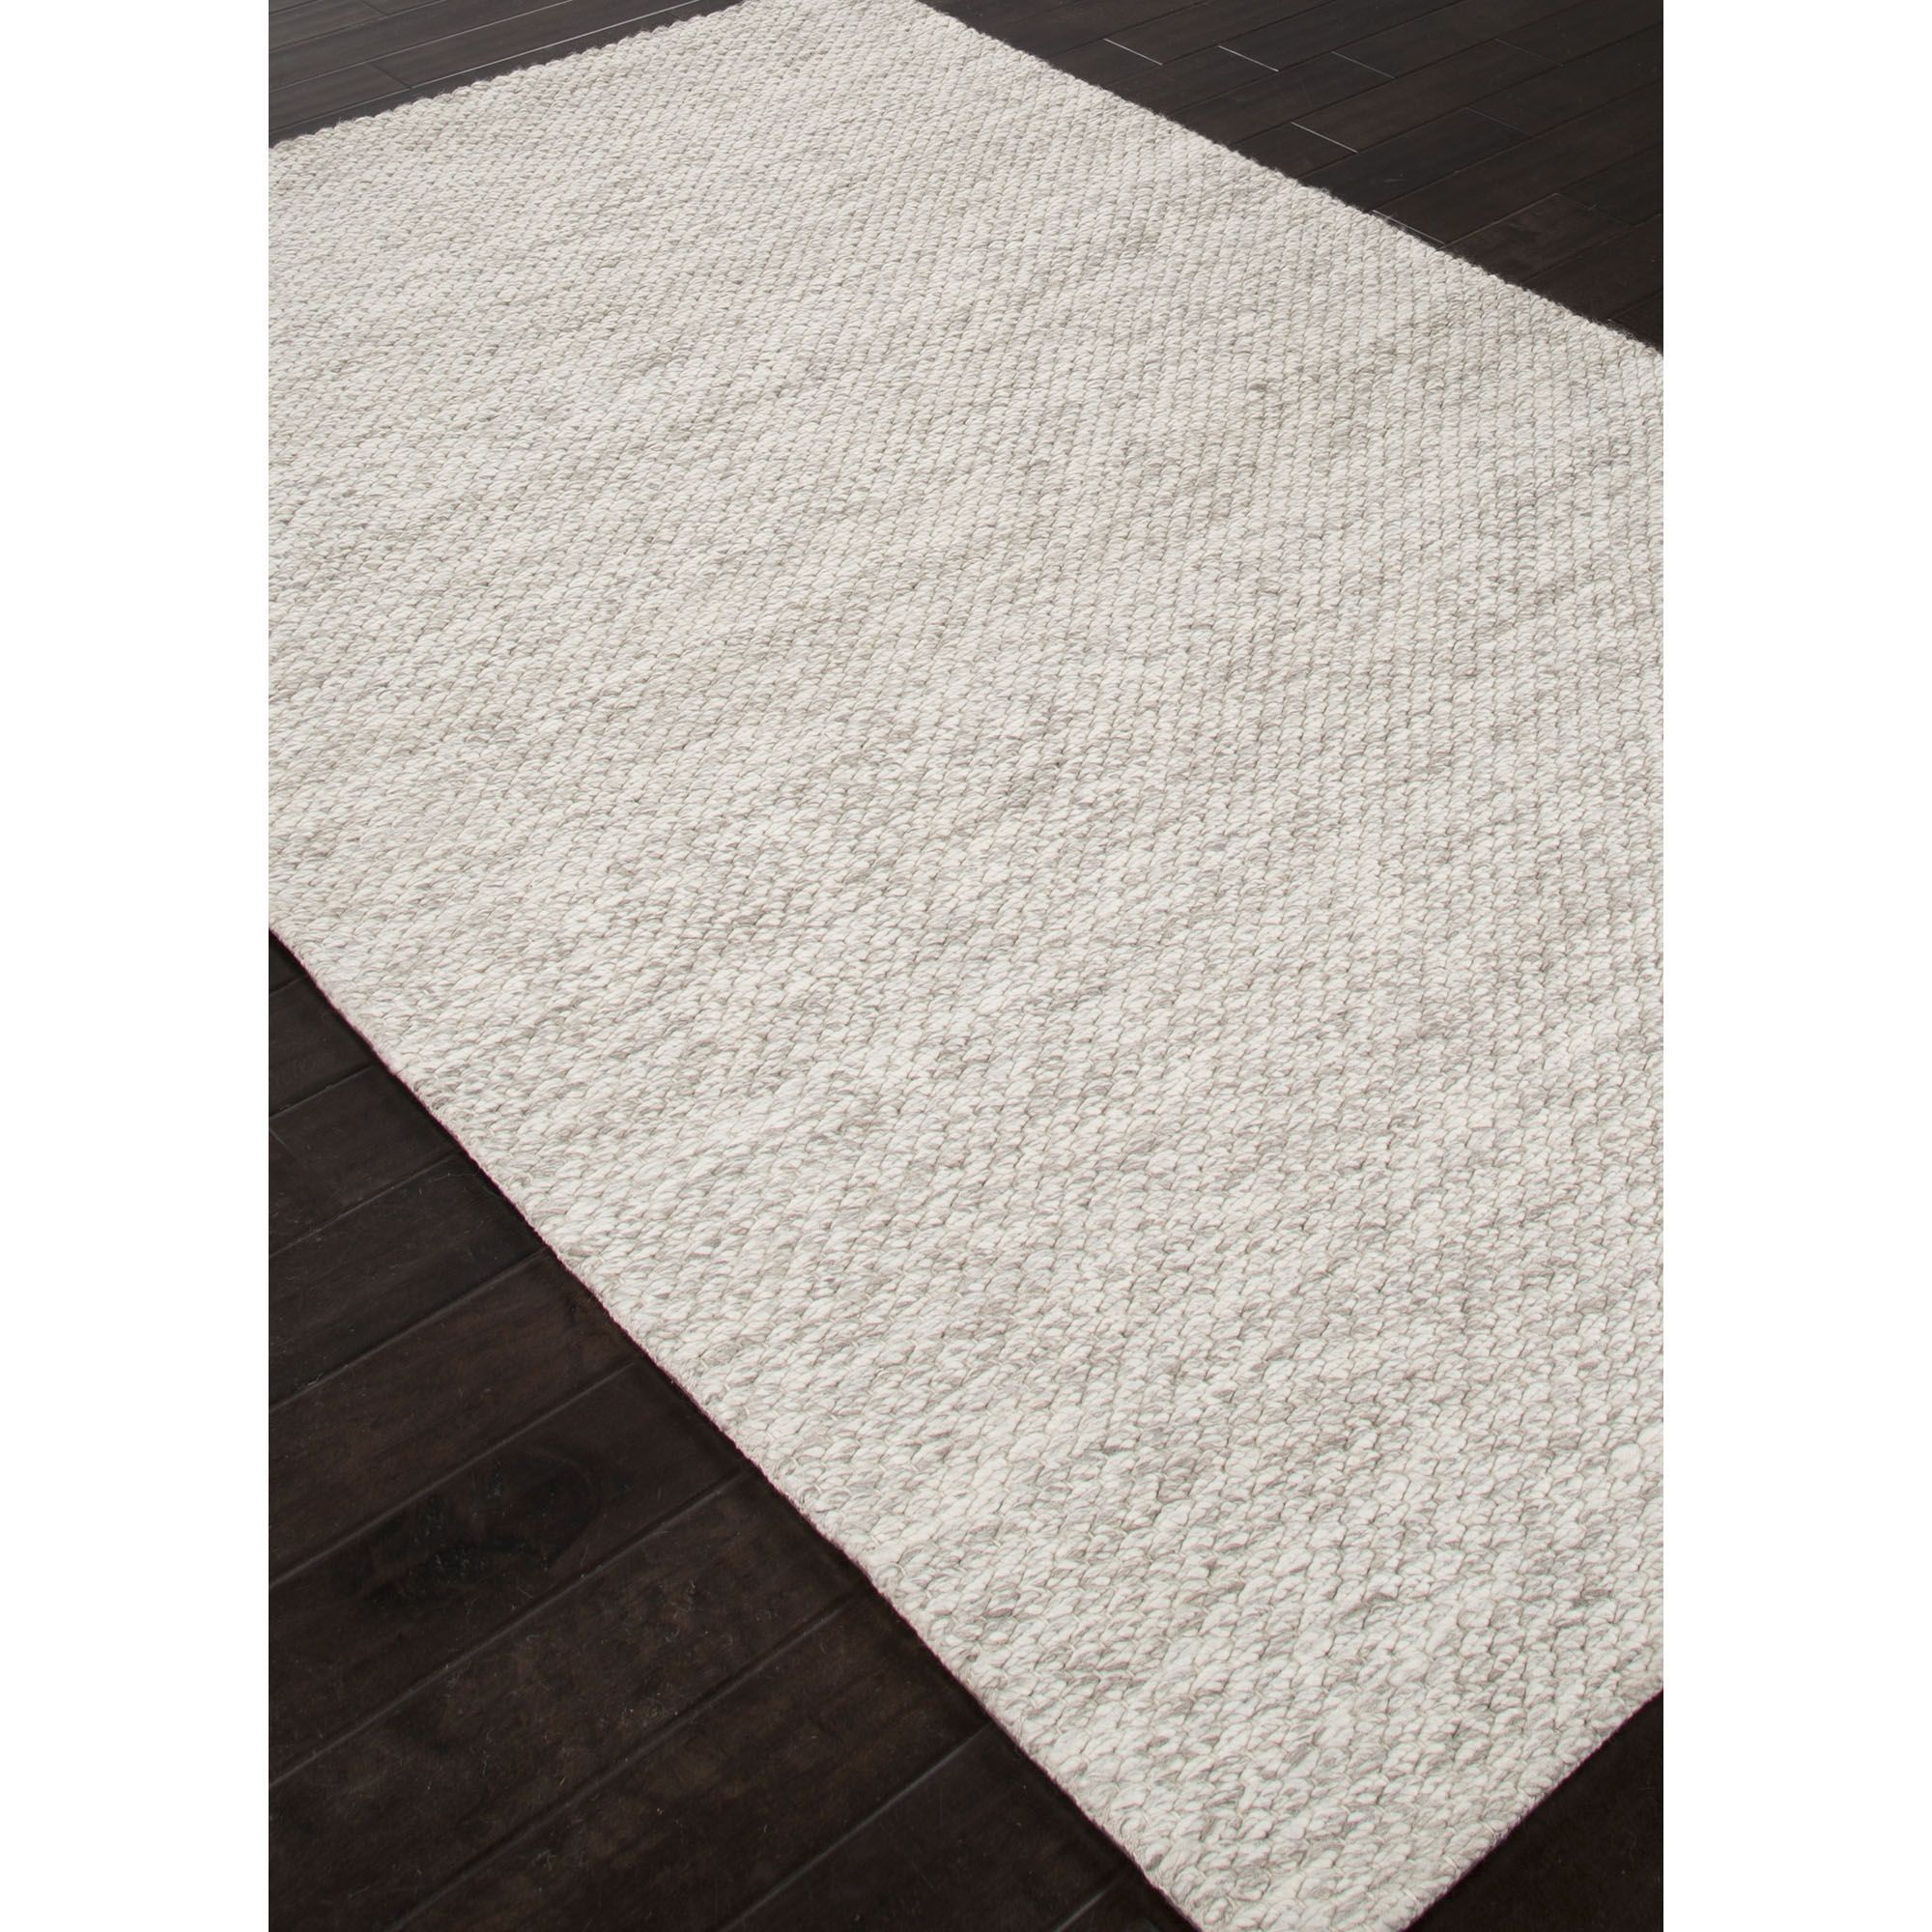 Rugs Appealing Pattern 8×10 Area Rug For Nice Floor Decor Ideas Pertaining To 8×10 Wool Area Rugs (View 1 of 15)